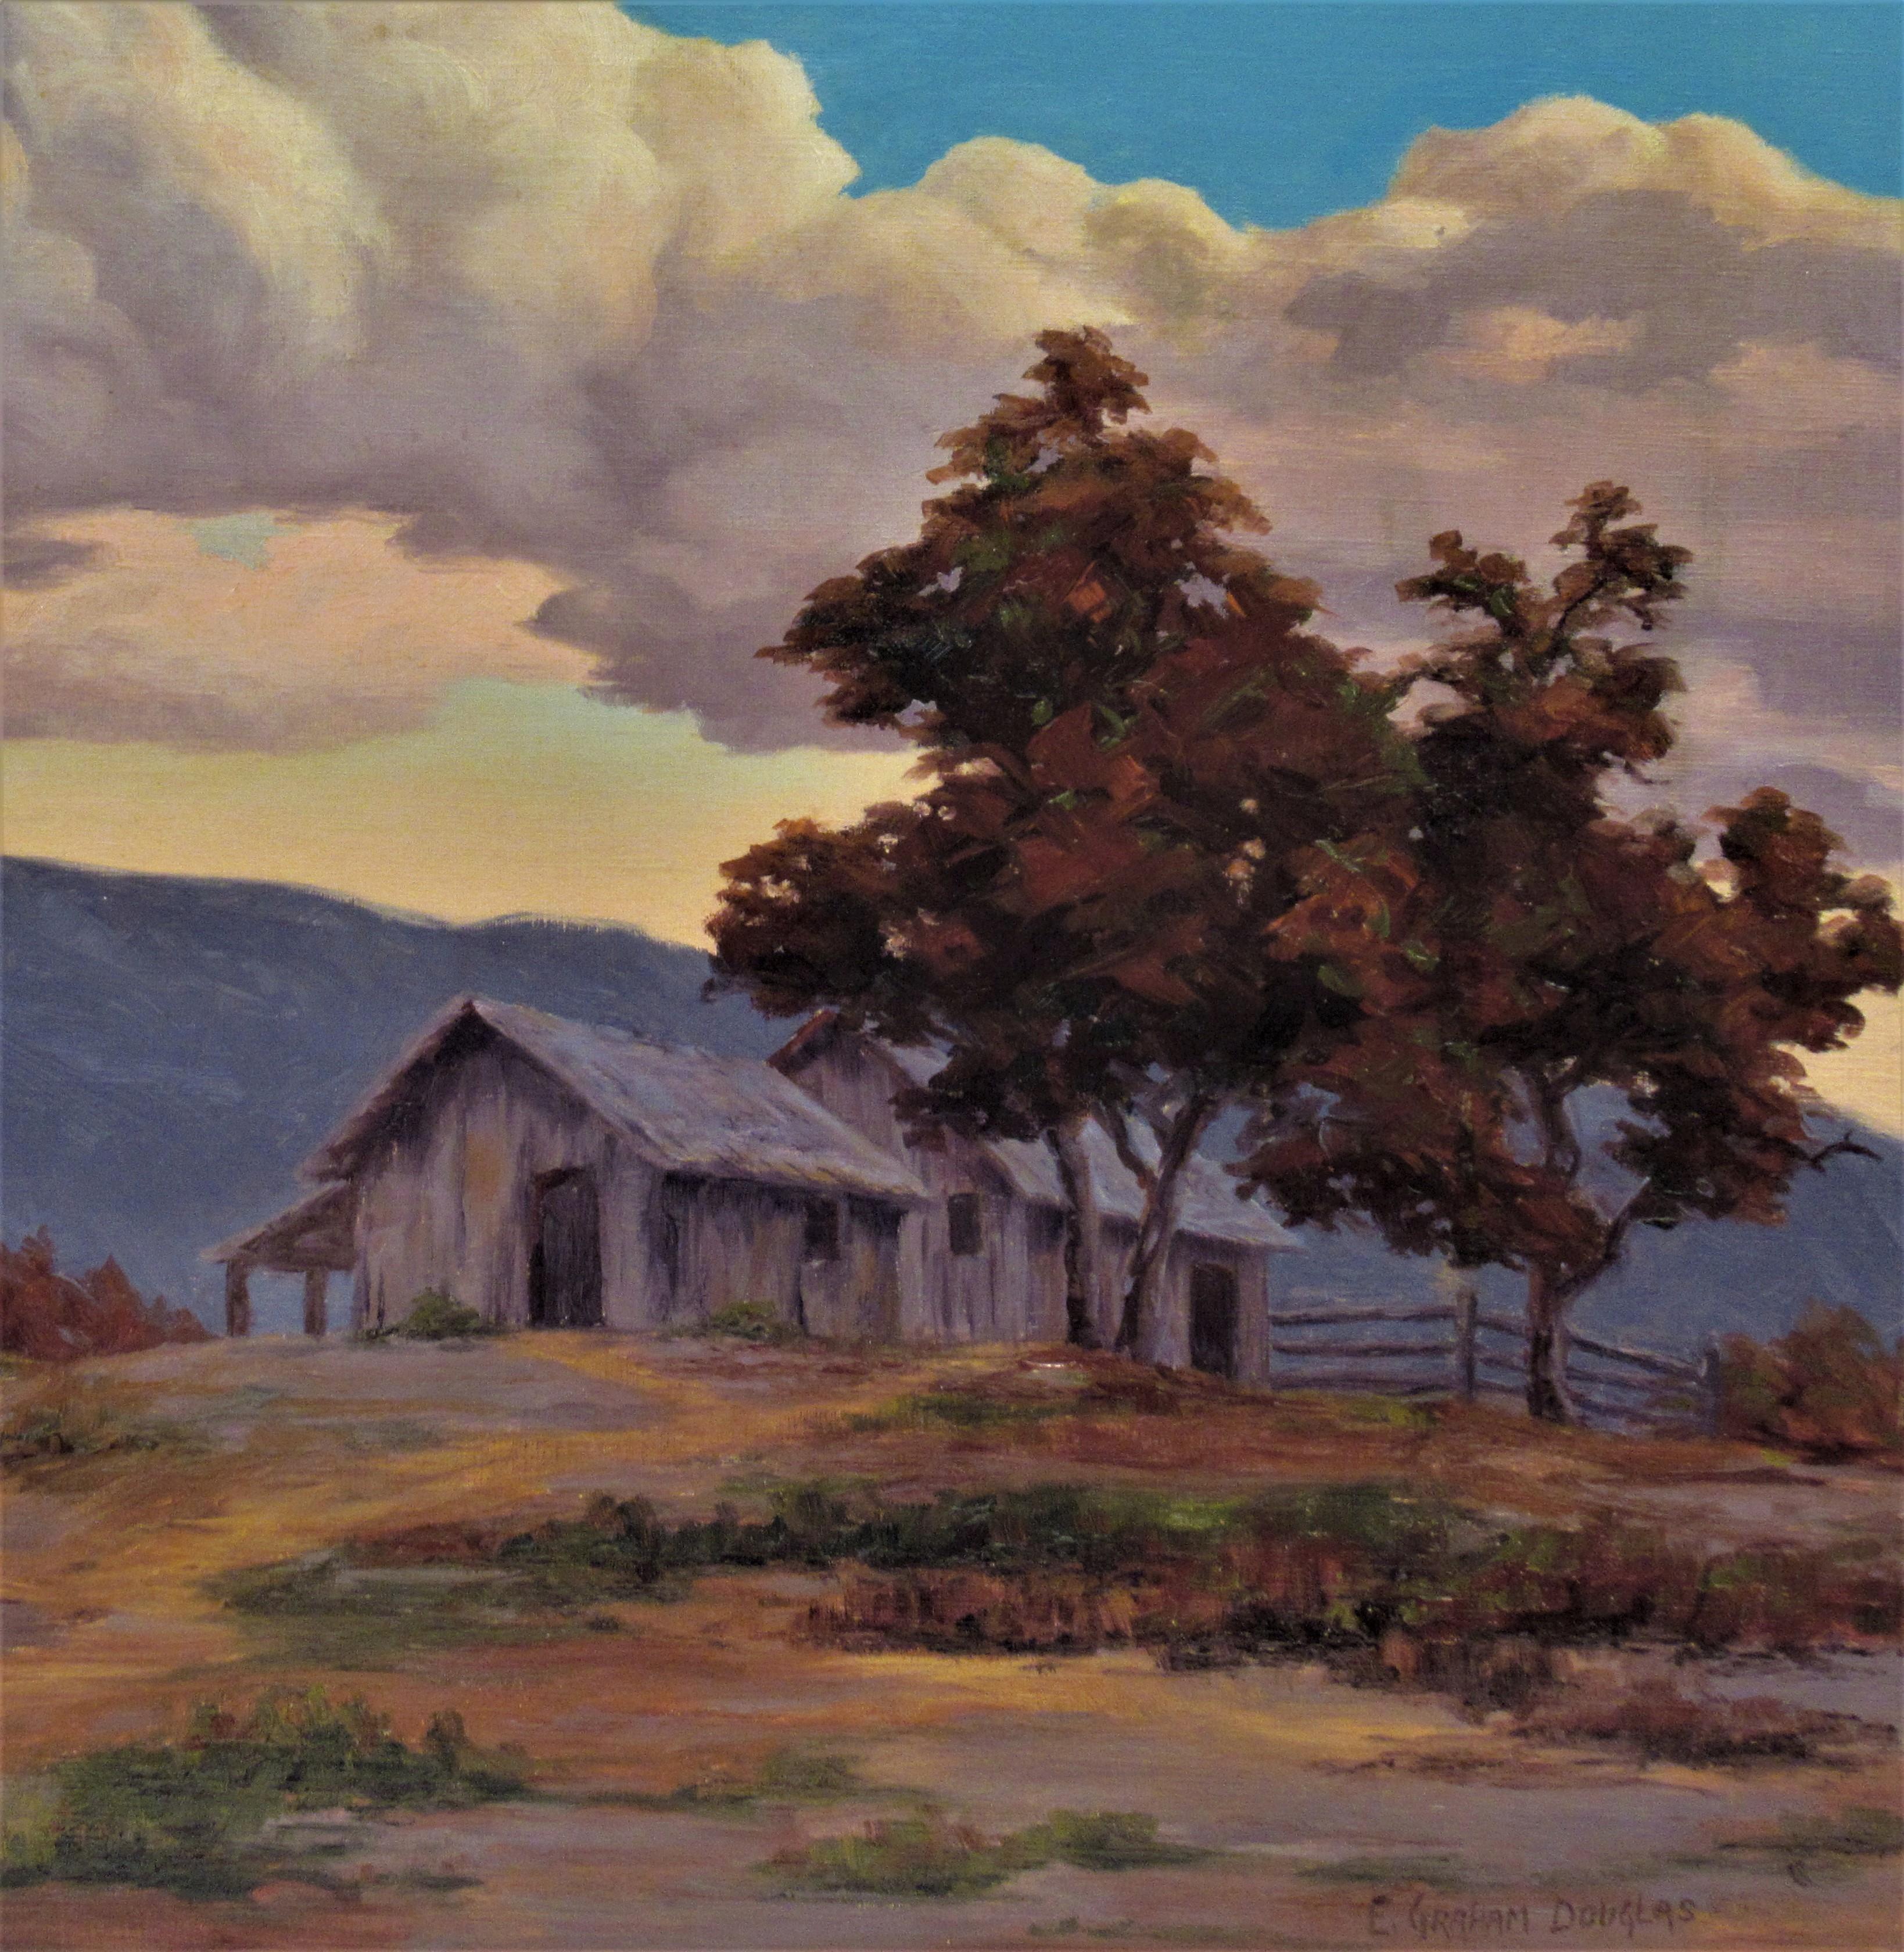 California Landscape with Houses - Painting by Earl Graham Douglas